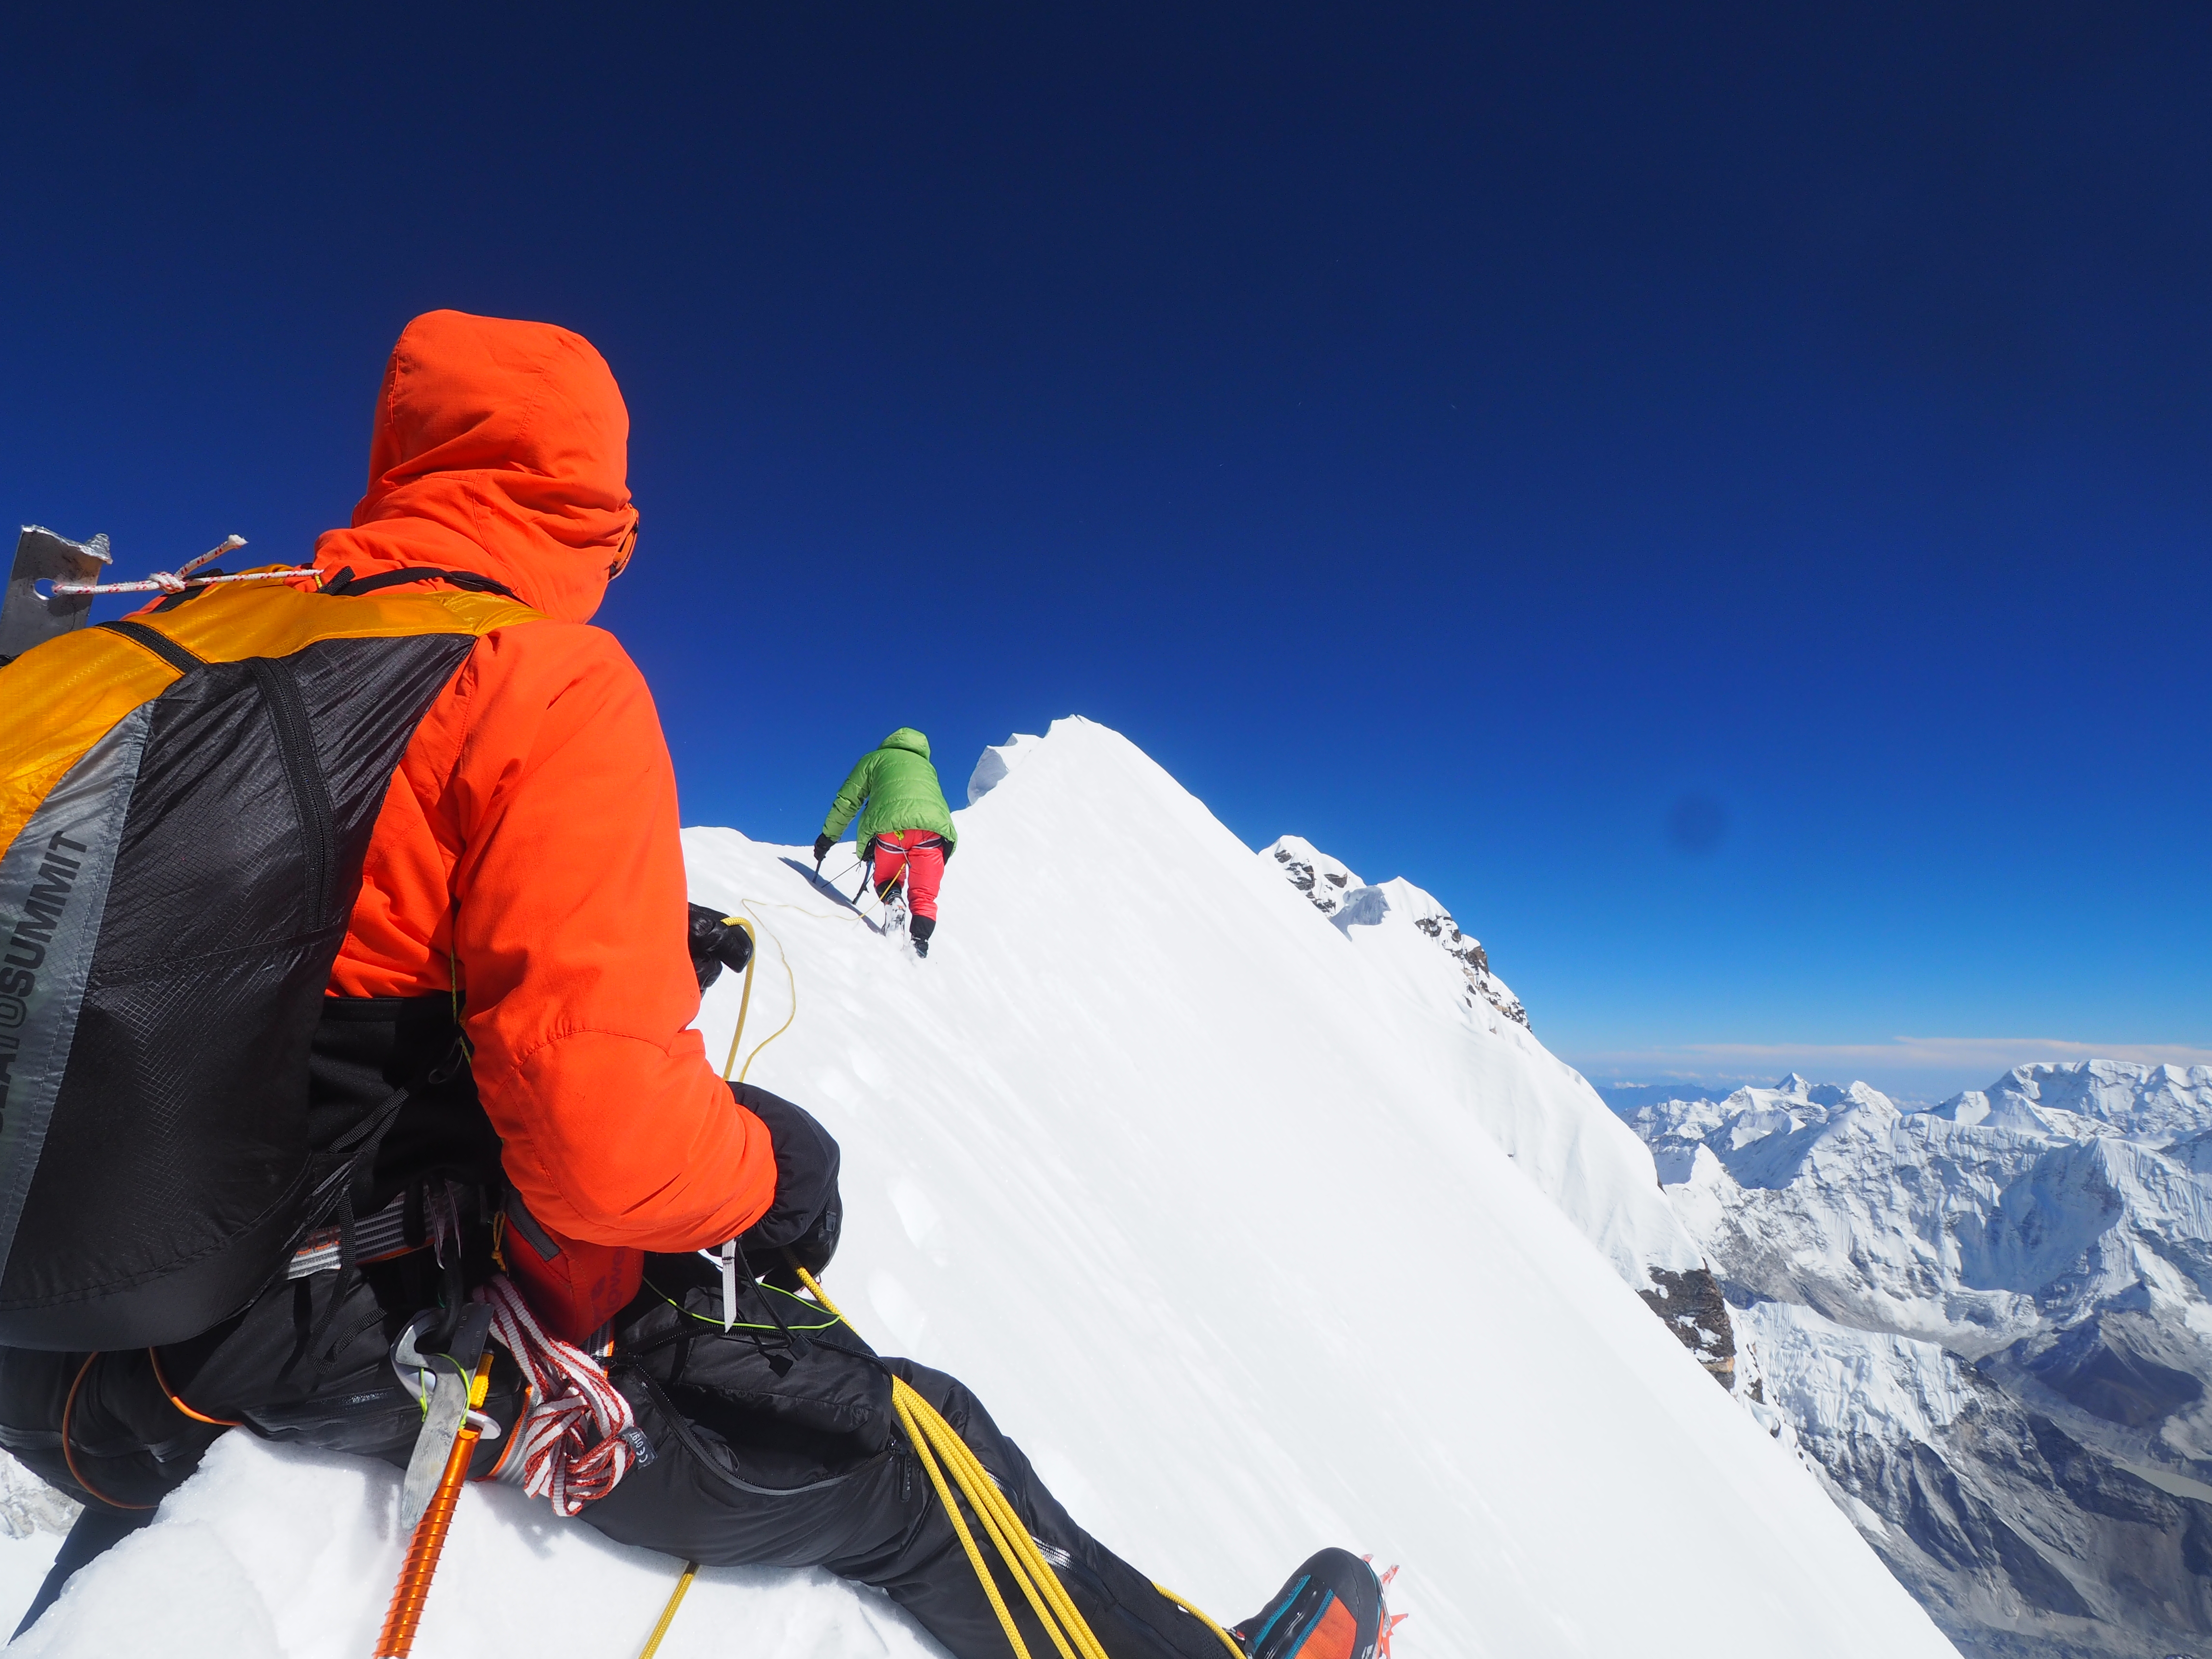 Helias Millerioux, Benjamin Guigonnet, Frederic Degoulet on the summit ridge of Nuptse, en route to completing the first ascent of the South Face (WI6 M5+, 2200m). The climb was selected for a Piolet d'Or.